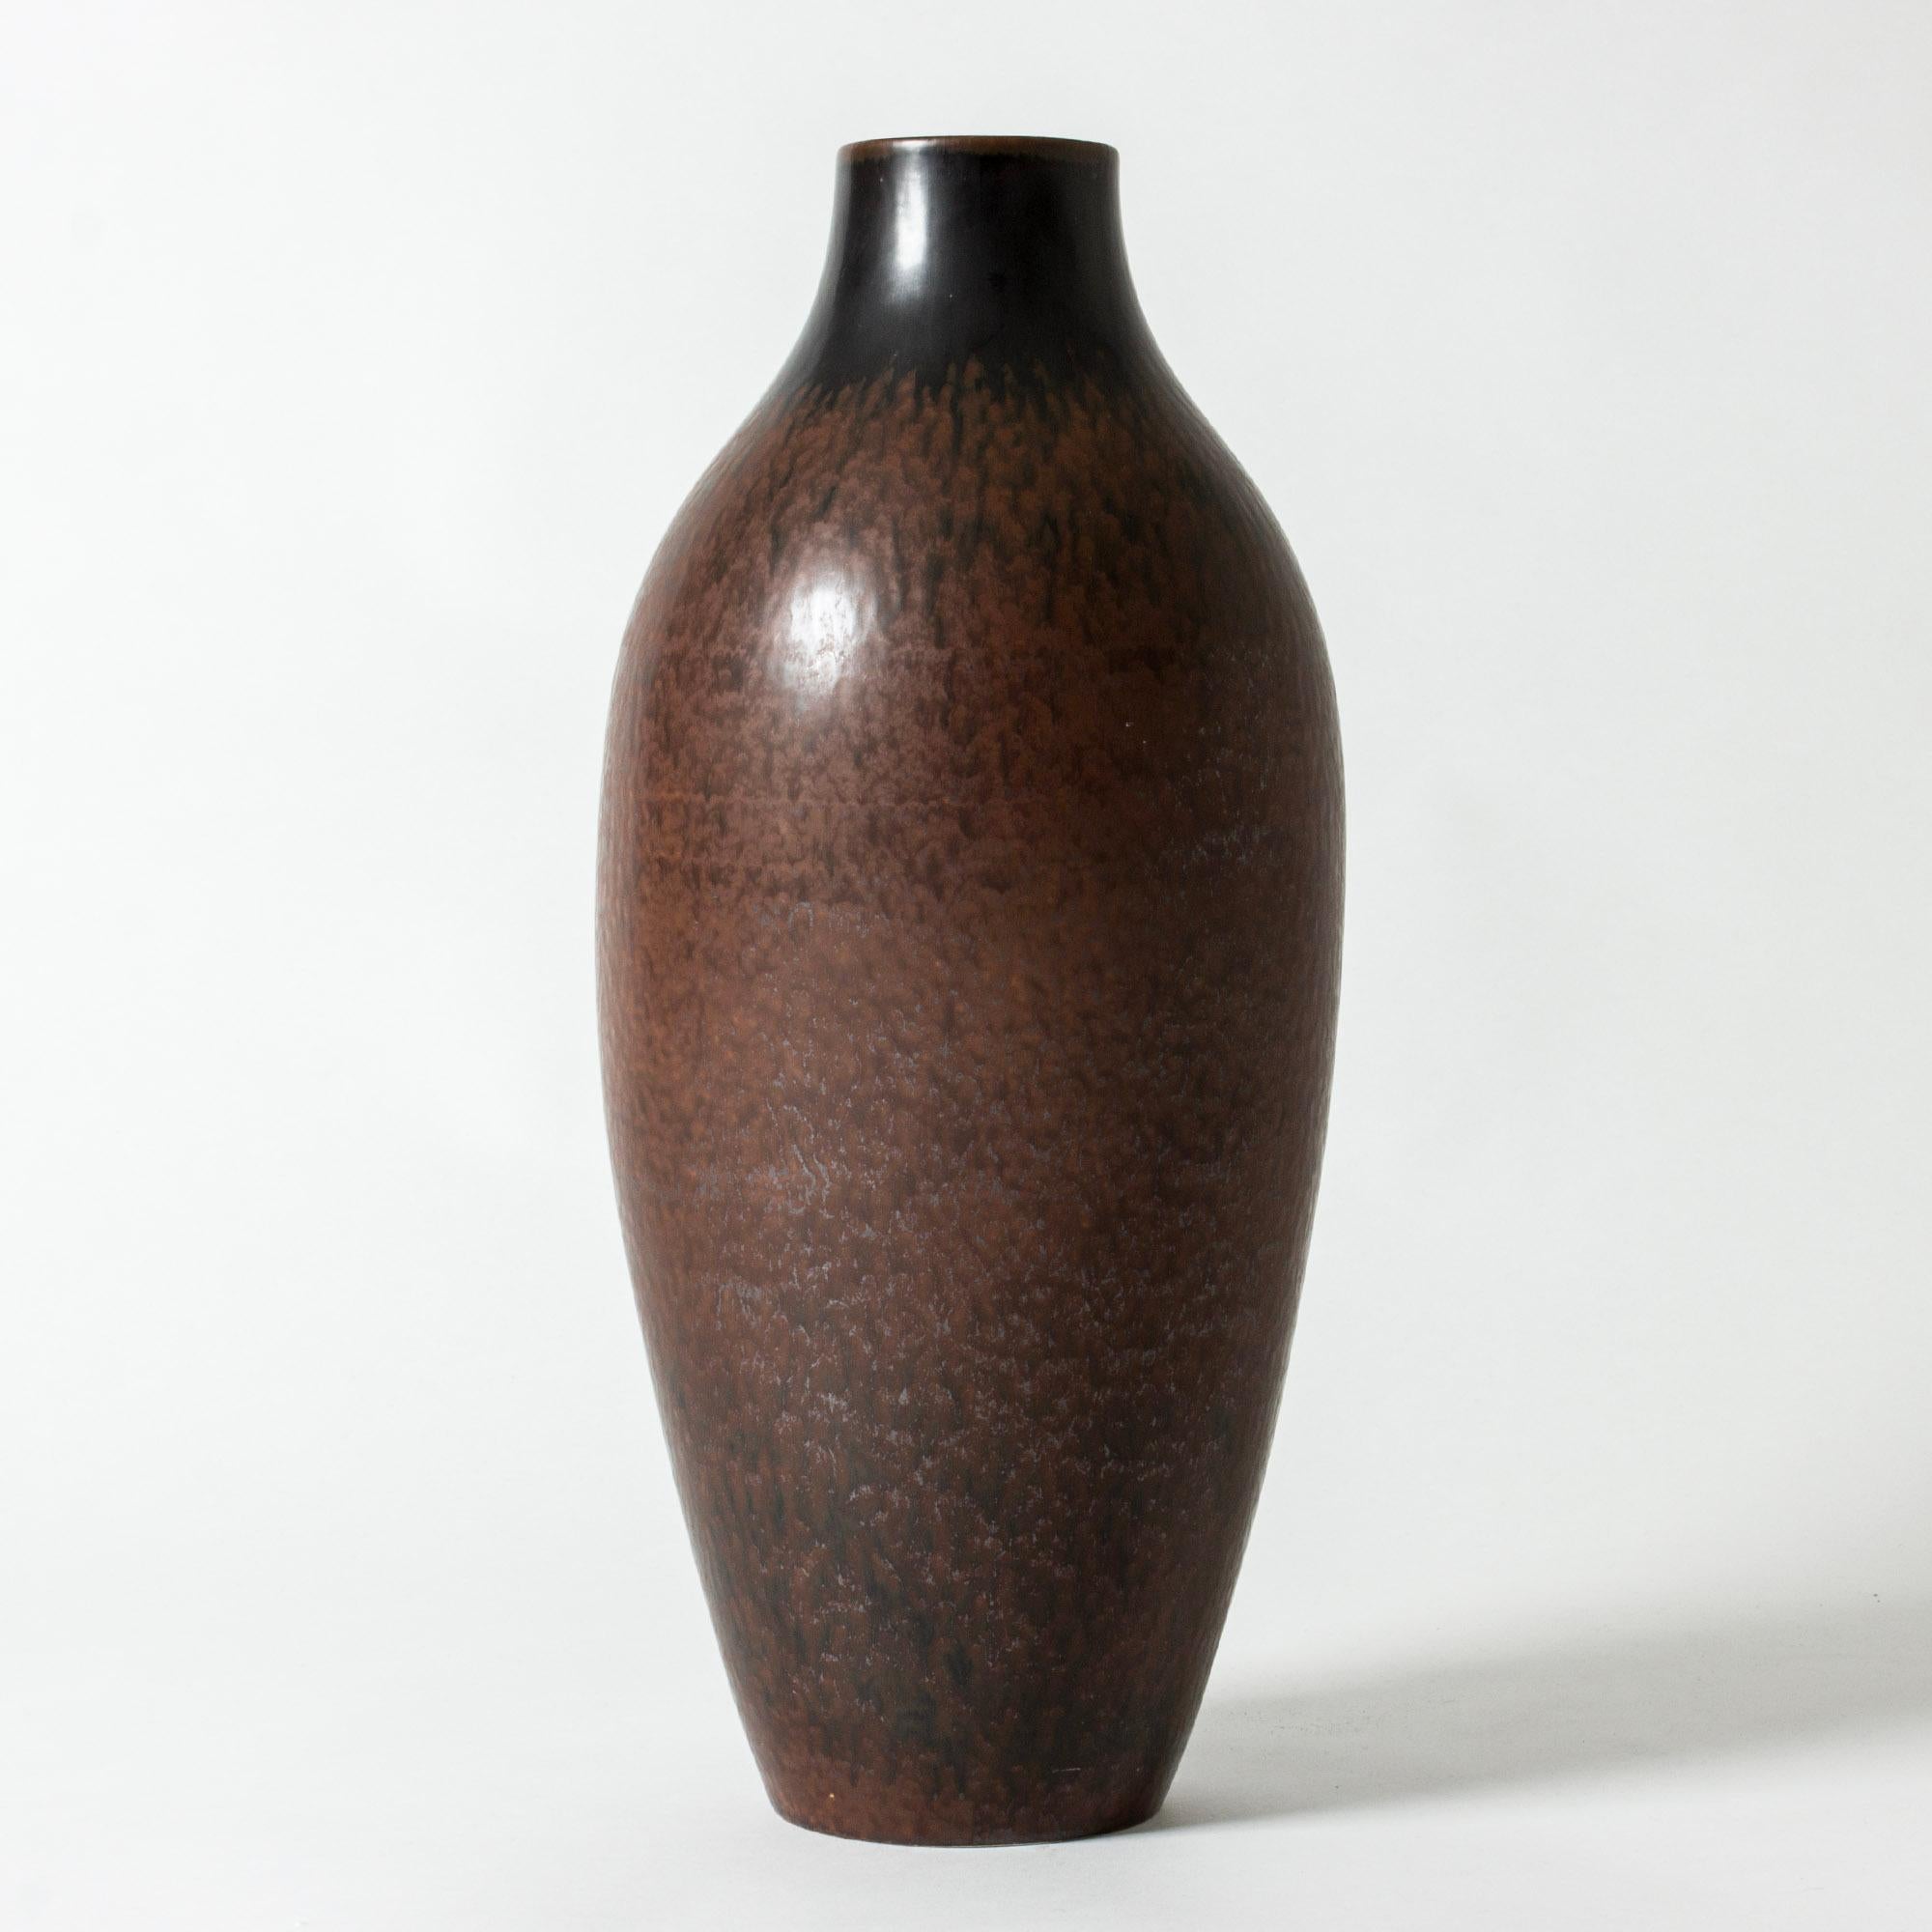 Statuesque stoneware floor vase by Carl-Harry Stålhane, in a clean form with rich brown glaze with grey streaks.

Carl-Harry Stålhane was one of the stars among Swedish ceramic artists during the 1950s, 1960s and 1970s, whose designs are just as